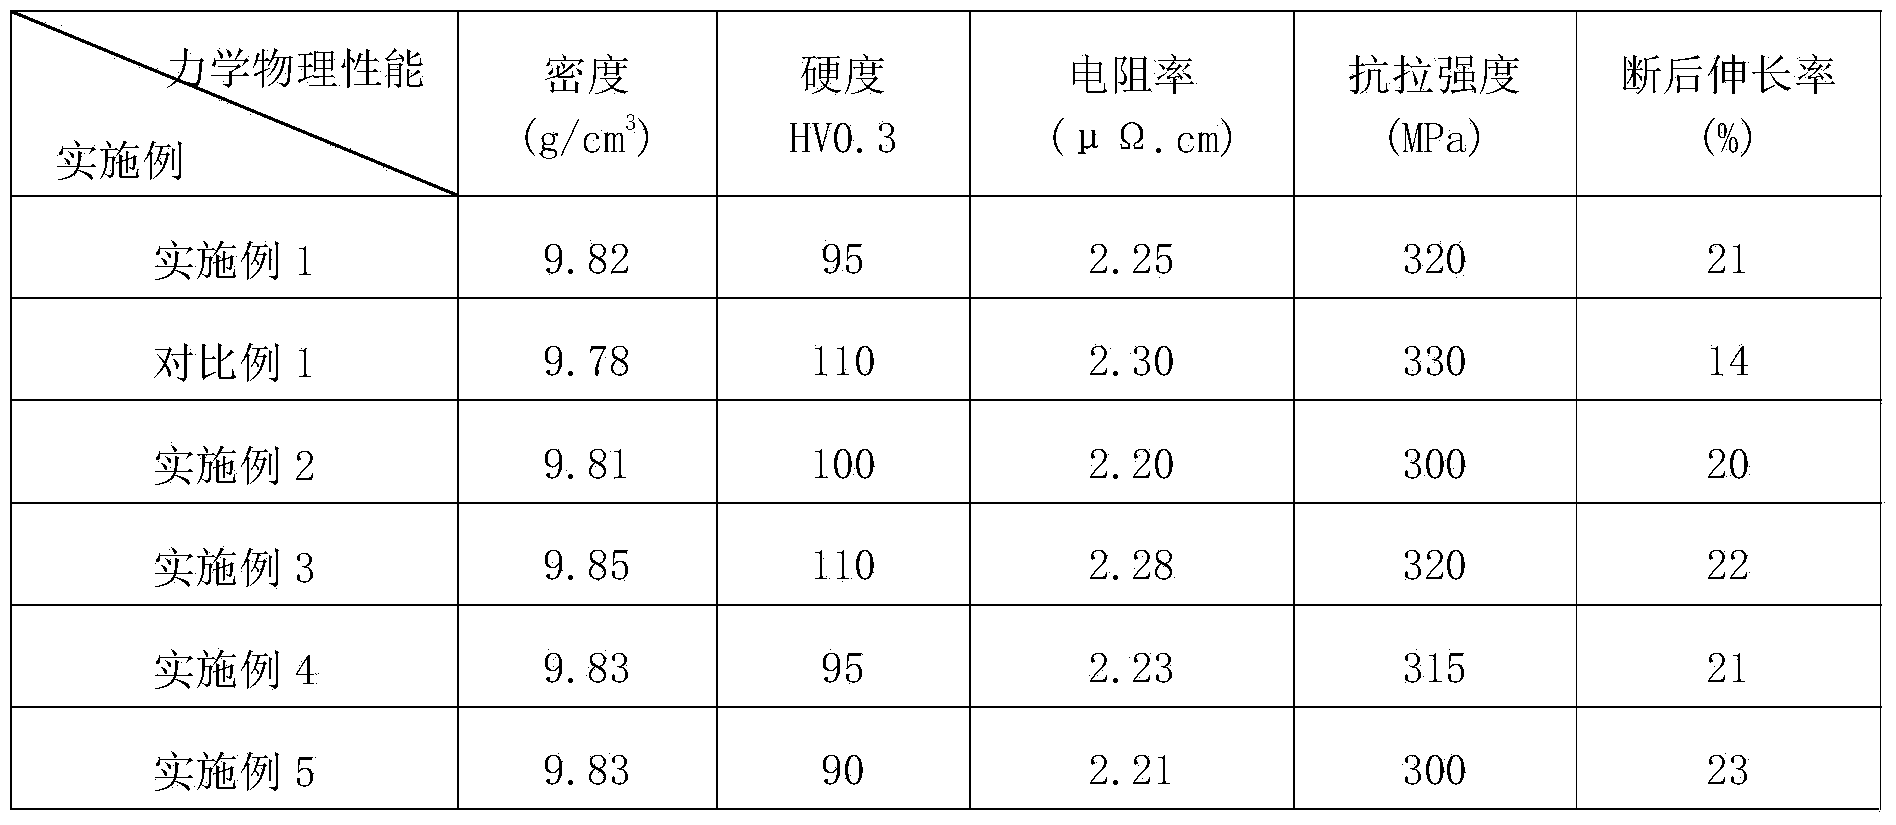 Method for preparing silver tin oxide contact materials by high pressure oxidation of alloy powder ingots